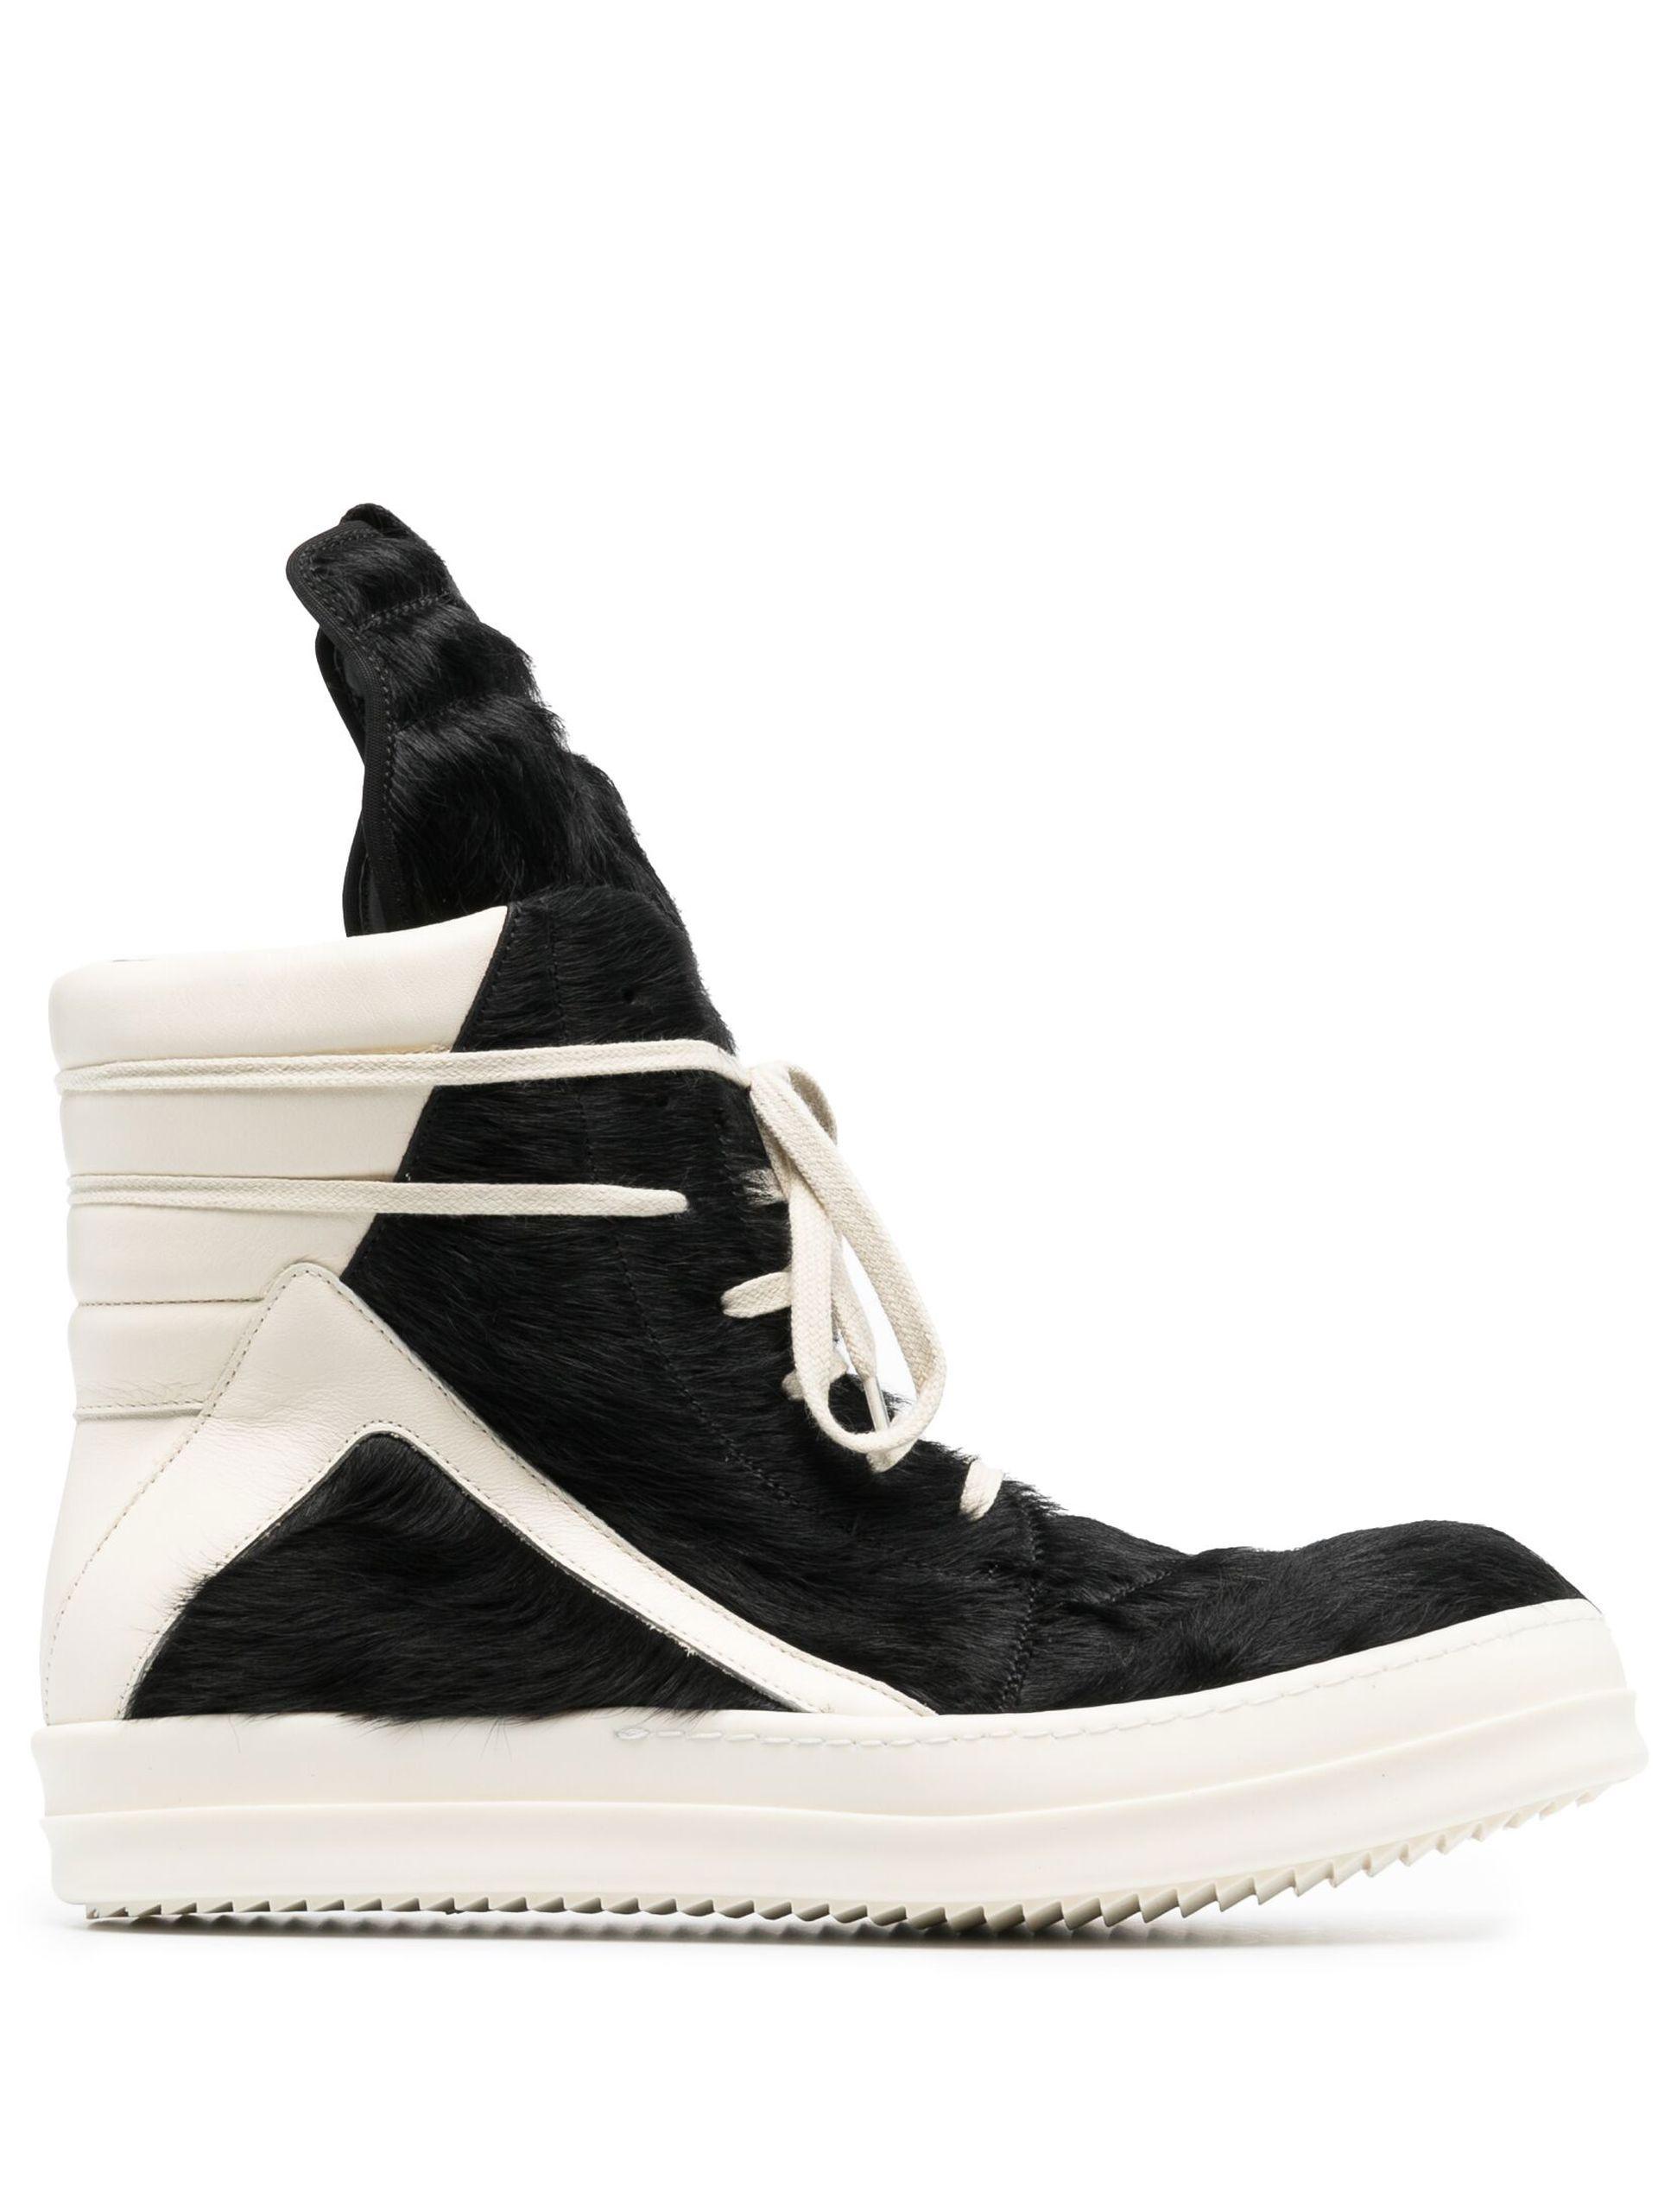 Rick Owens Geobasket Pony Hair High-top Sneakers in White for Men | Lyst